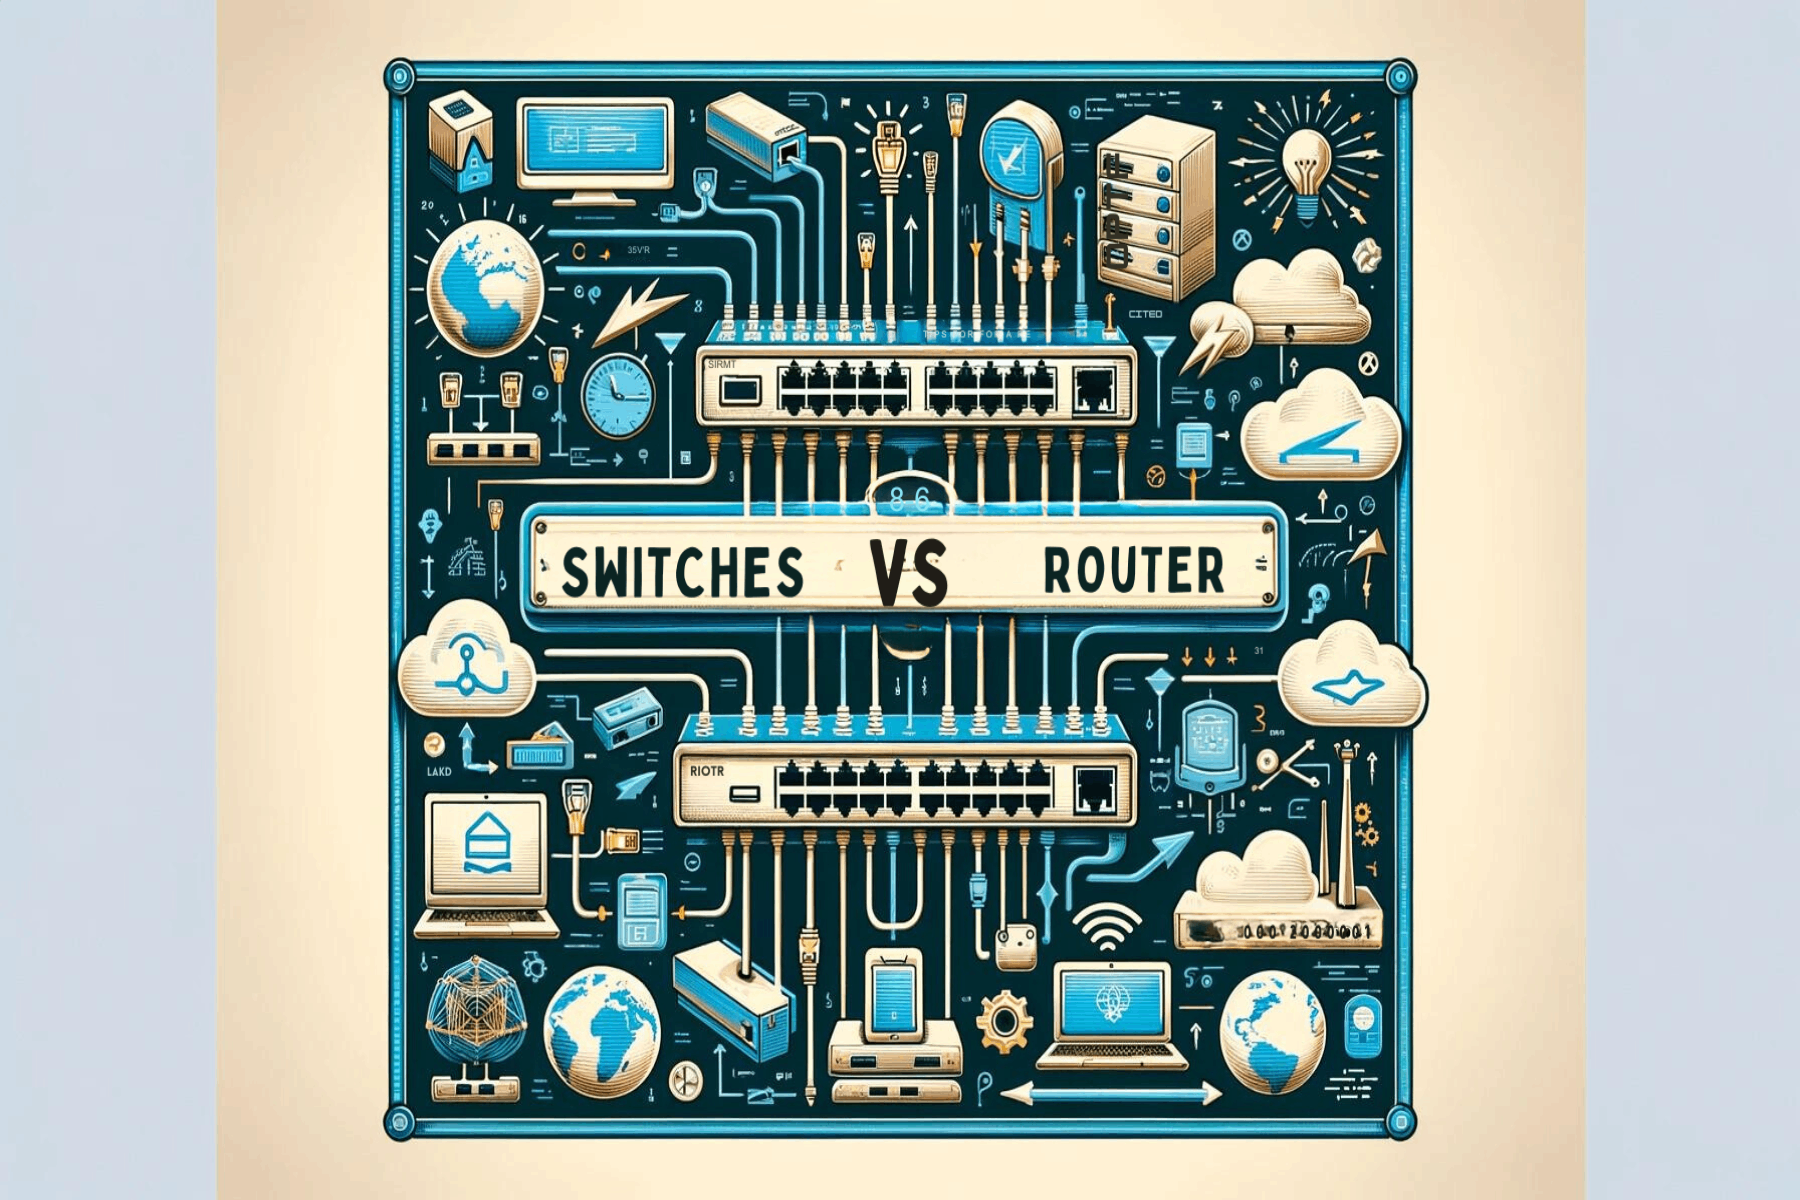 Switches VS Router